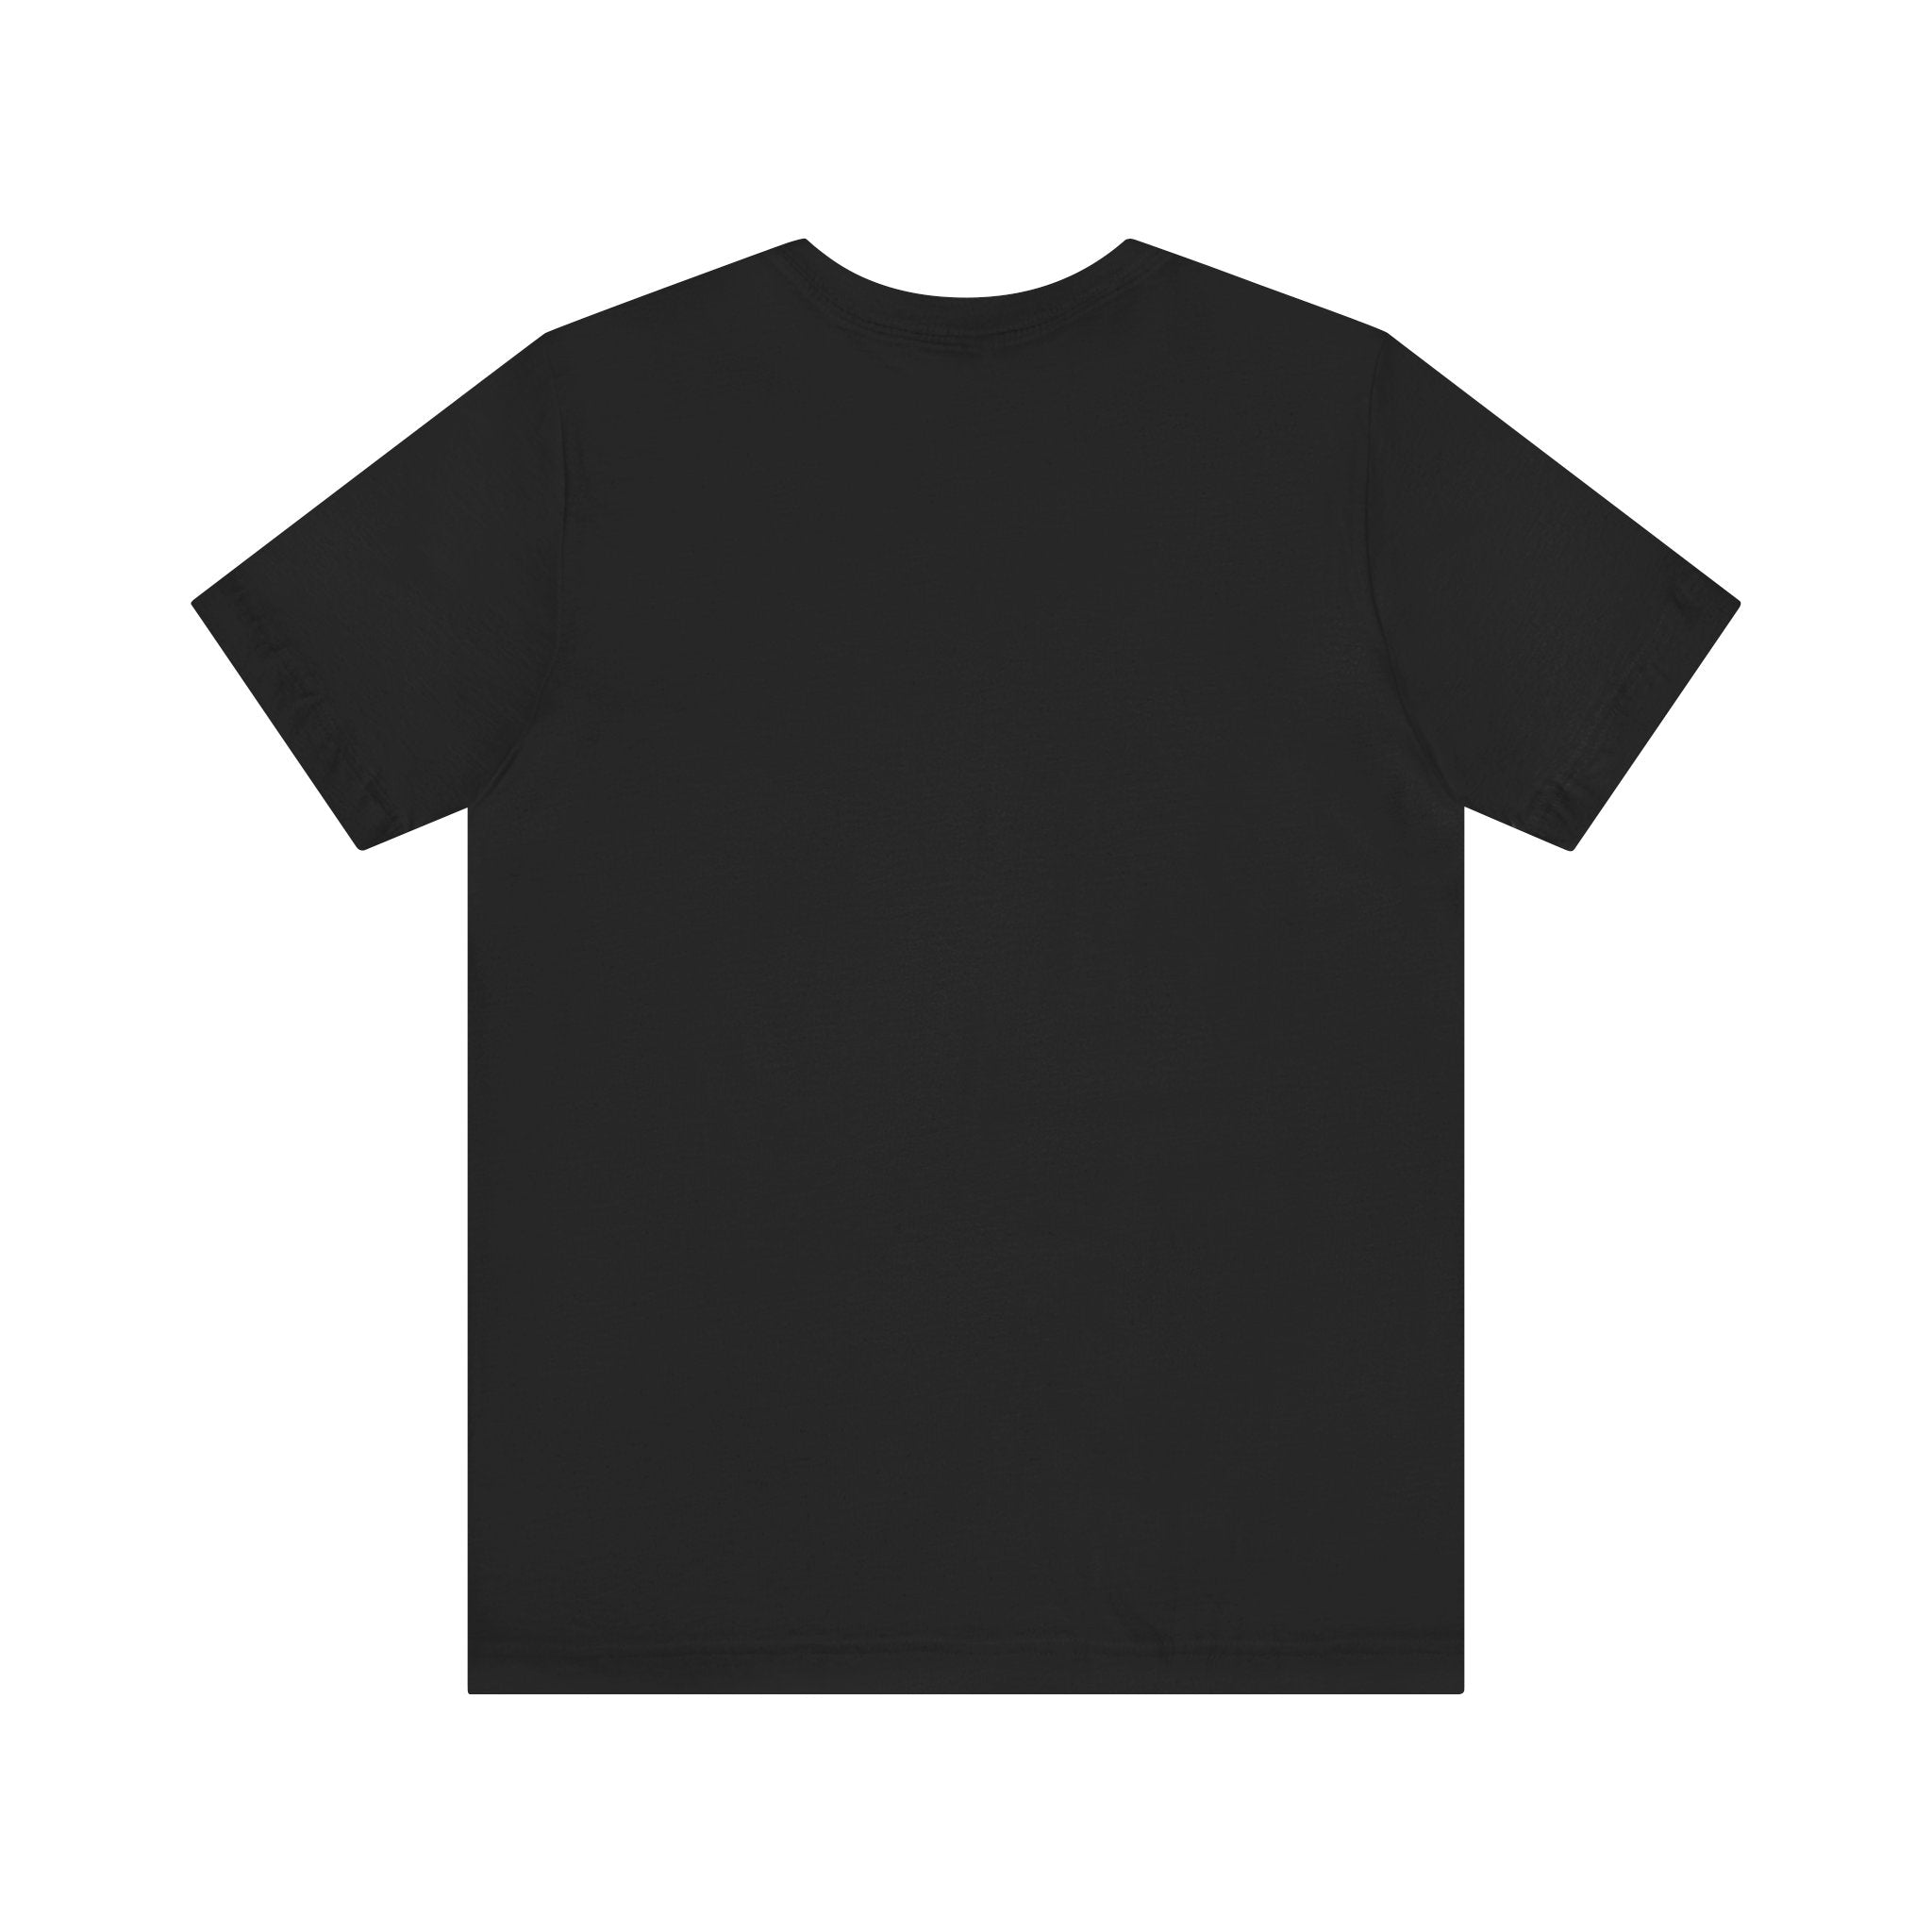 A plain black short-sleeve C-Ho-Co-La-Te - T-Shirt, made from 100% Airlume cotton, is shown from the back.